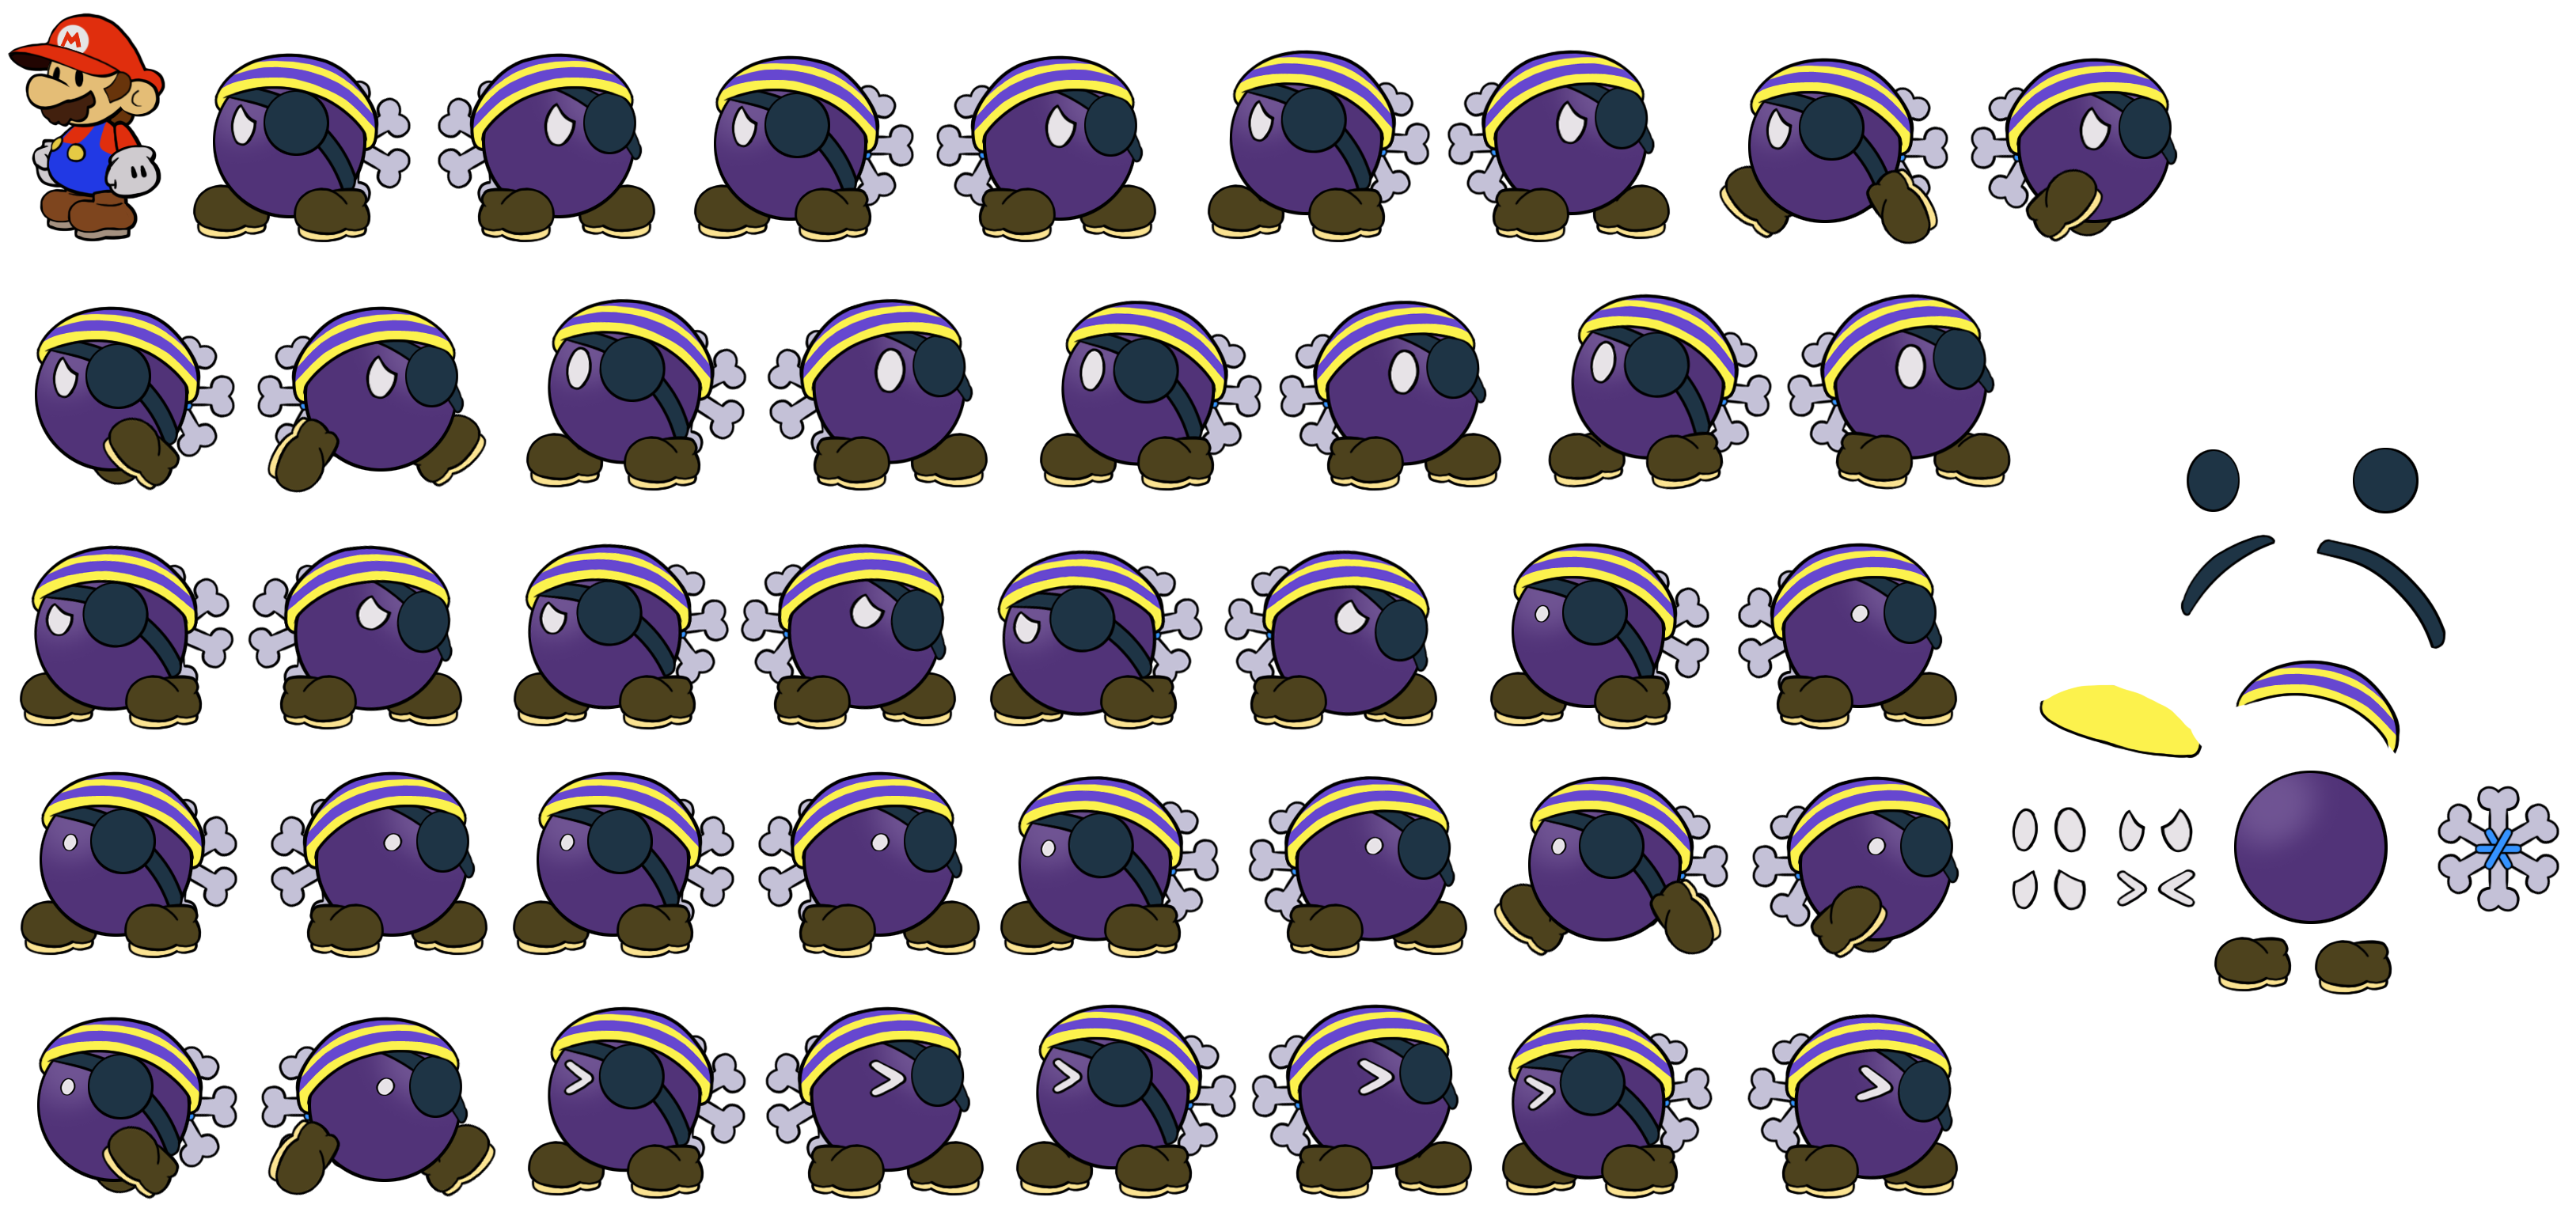 Paper Mario Customs - Pa-Patch (Paper Mario-Style)